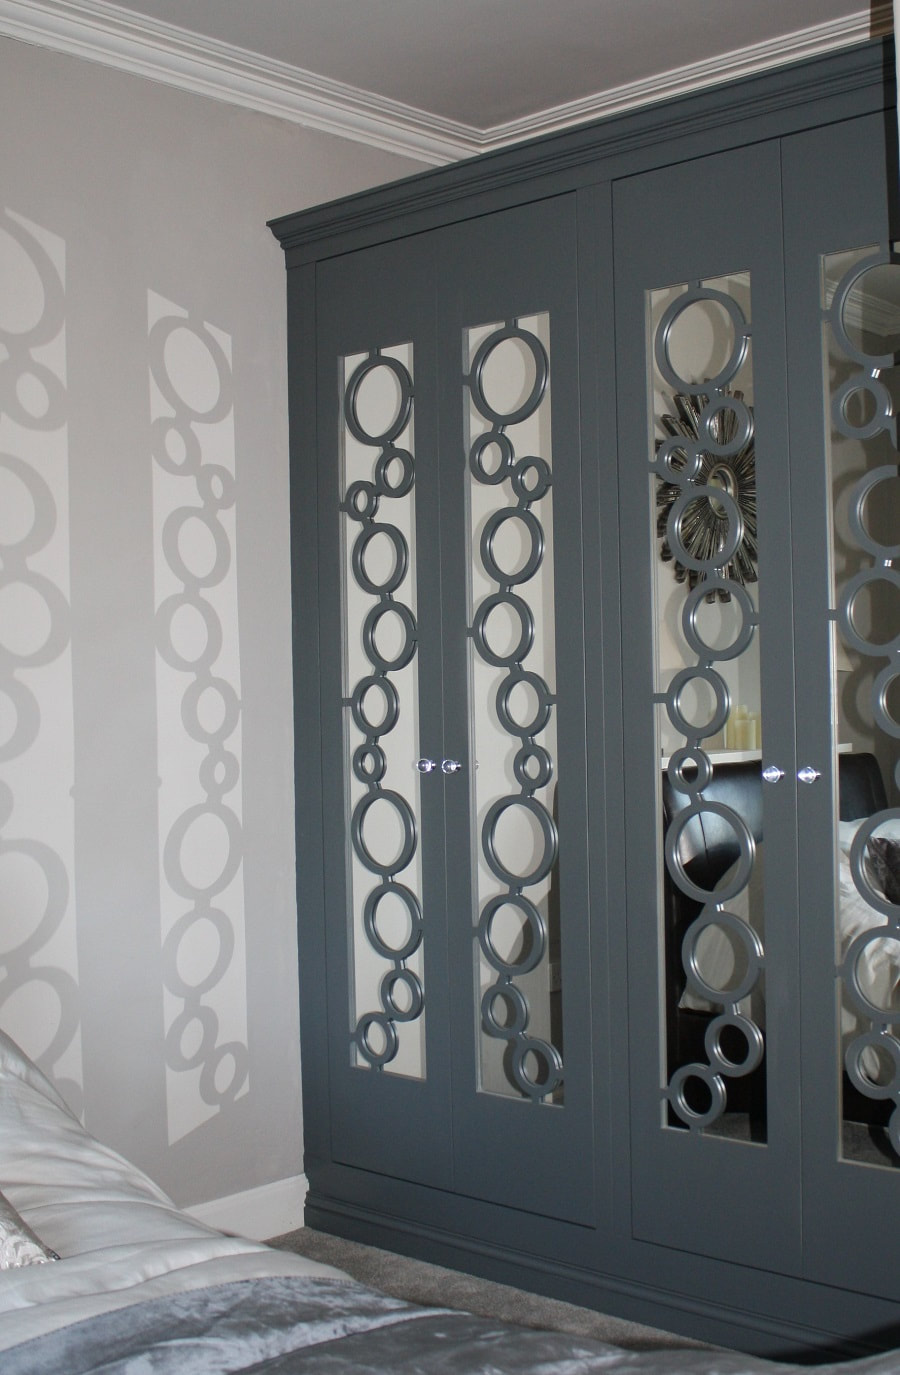 Bespoke wardrobes with circles on mirrored doors